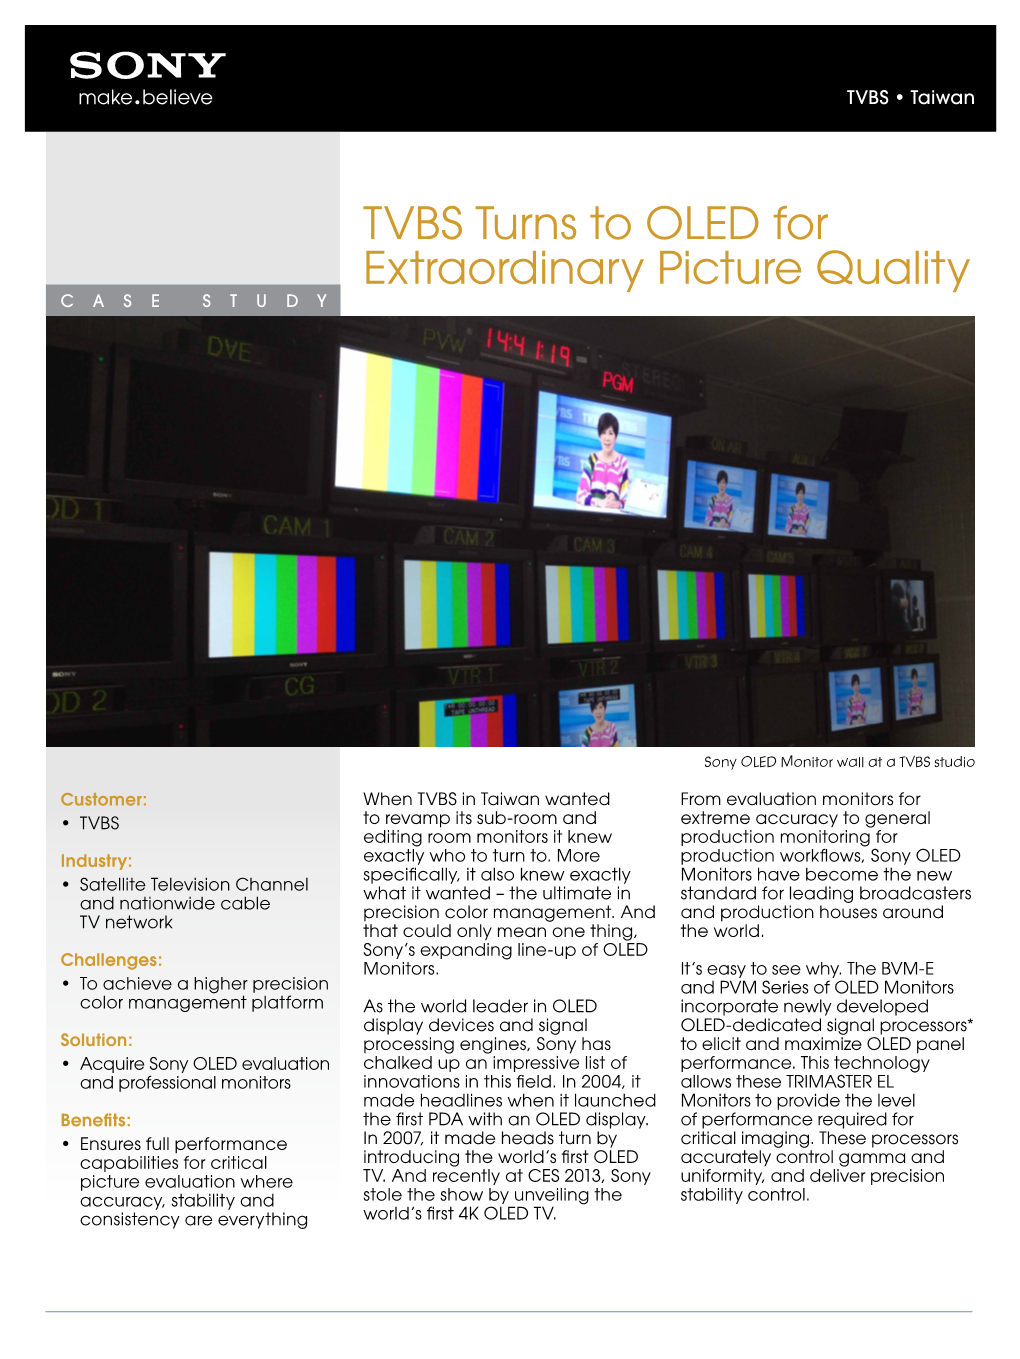 TVBS Turns to OLED for Extraordinary Picture Quality CASE STUDY